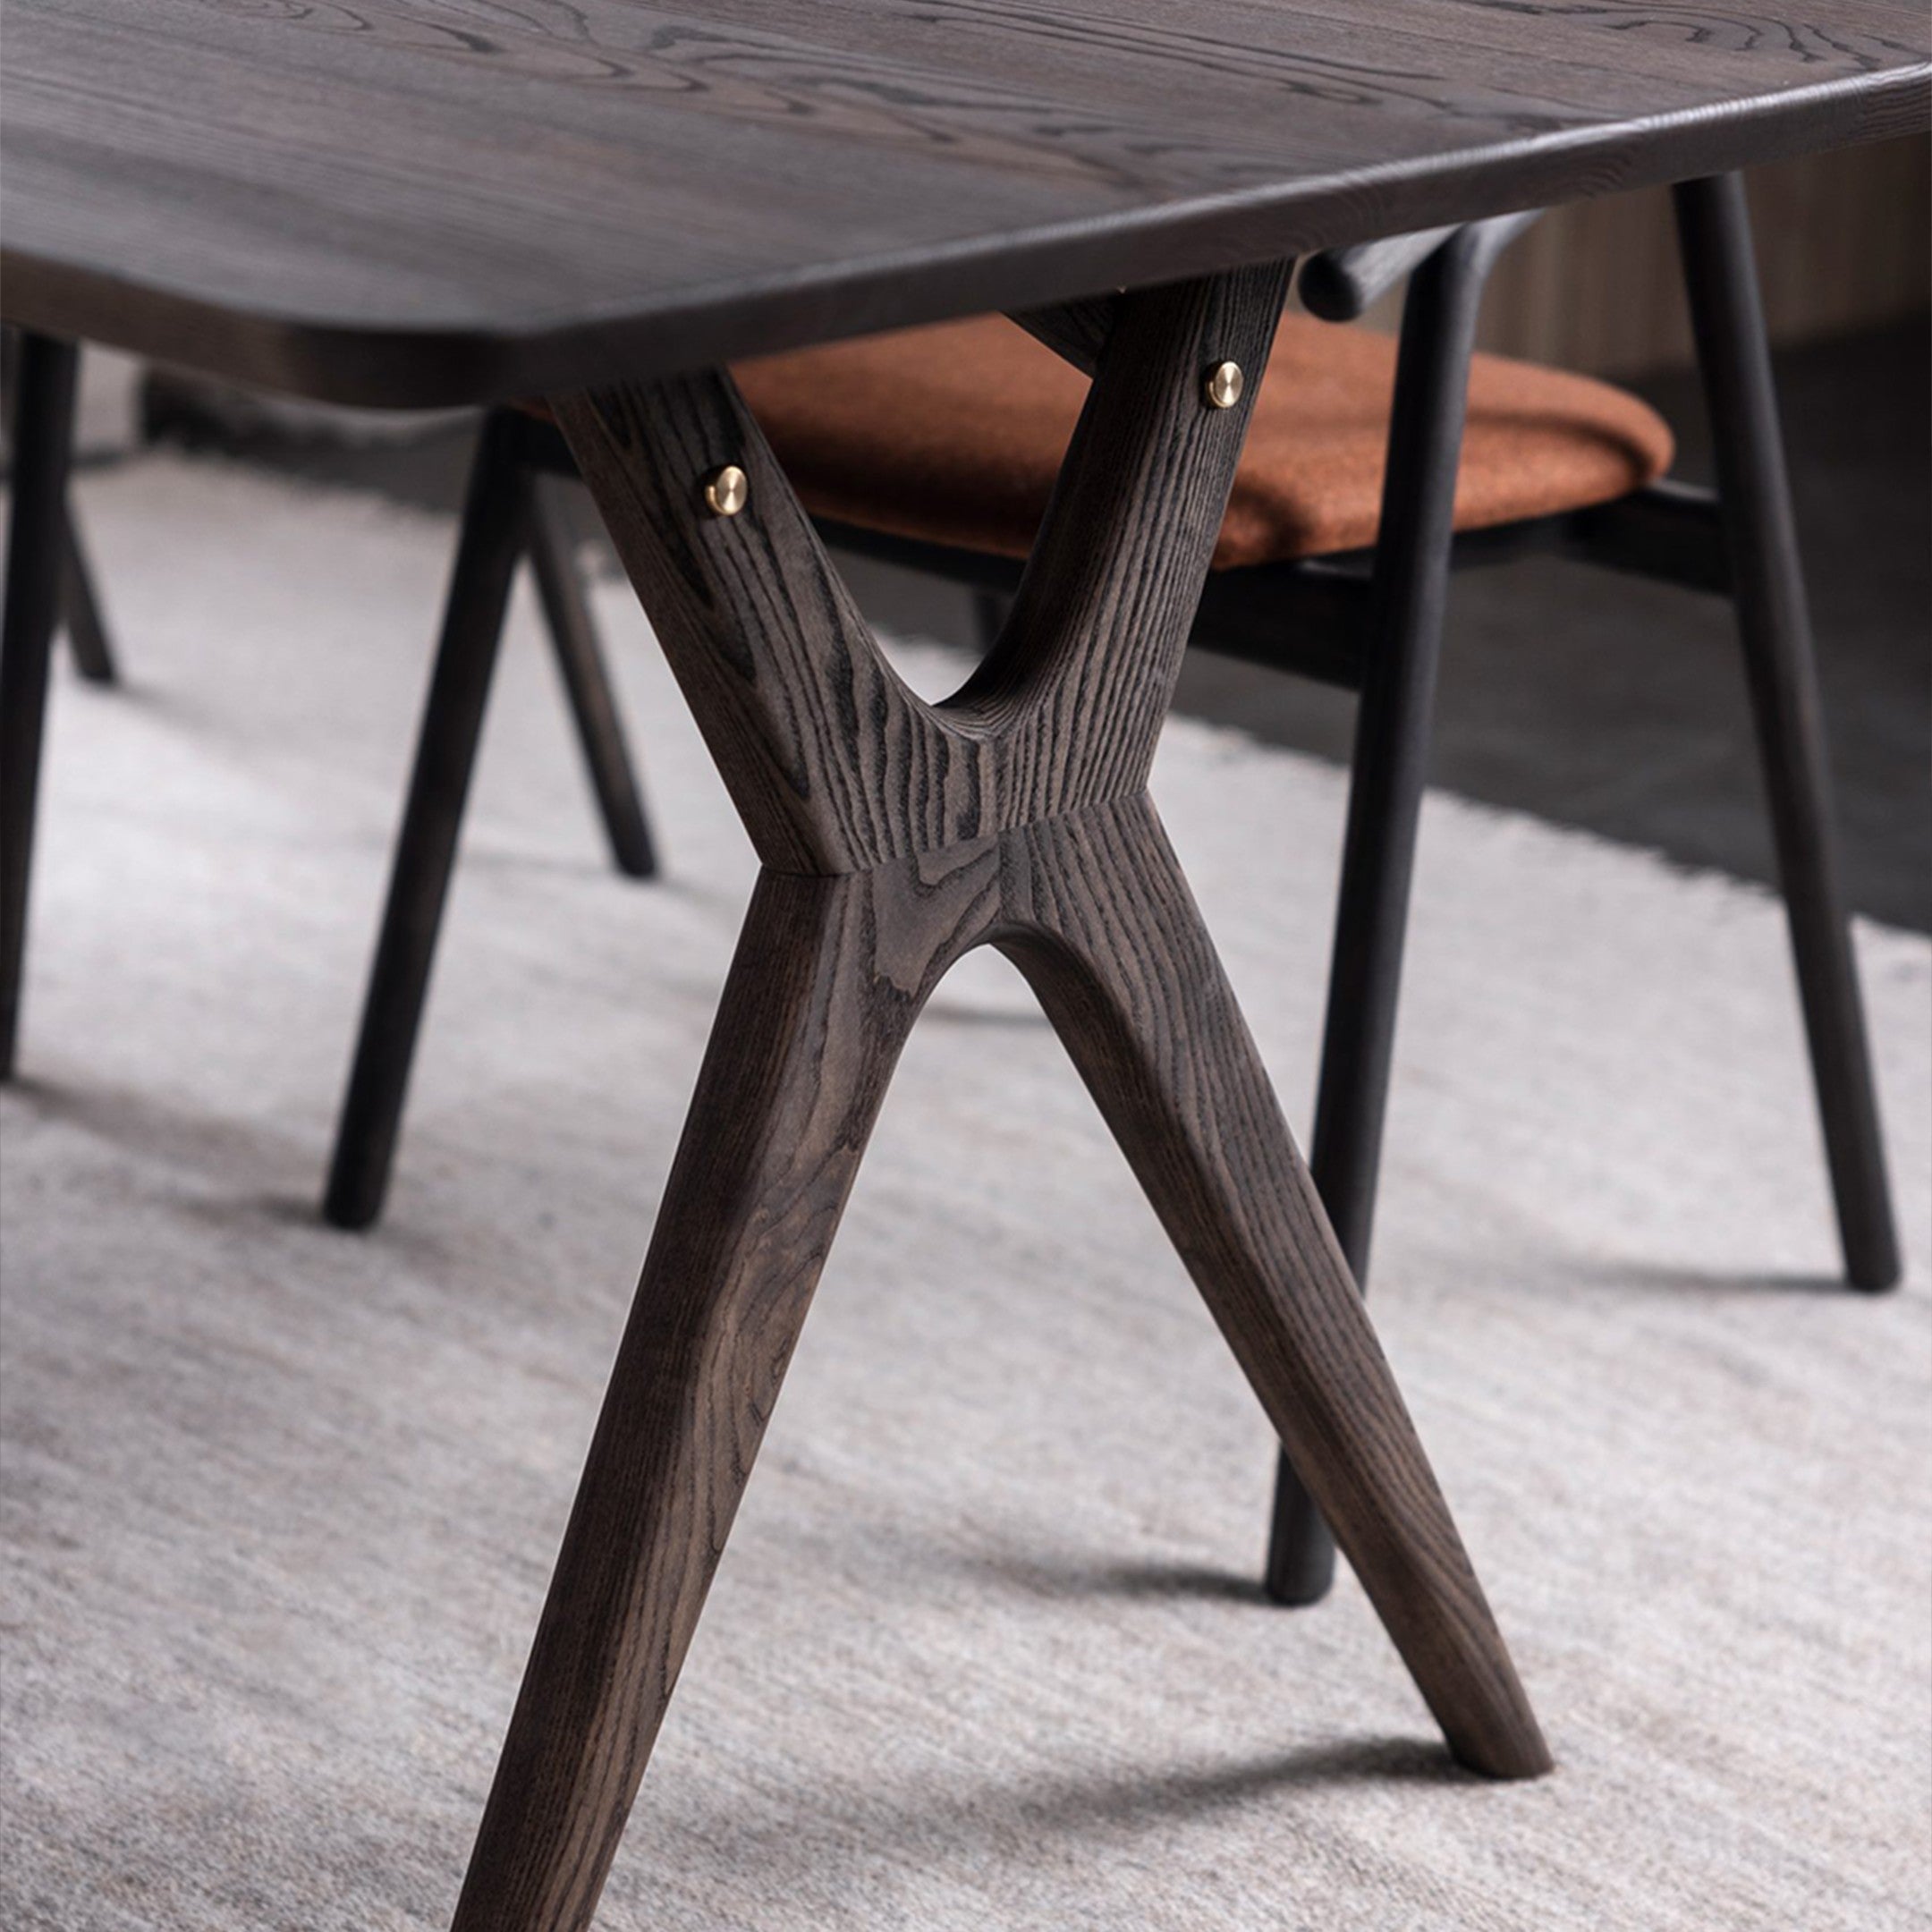 Ribni Wooden Dining Table